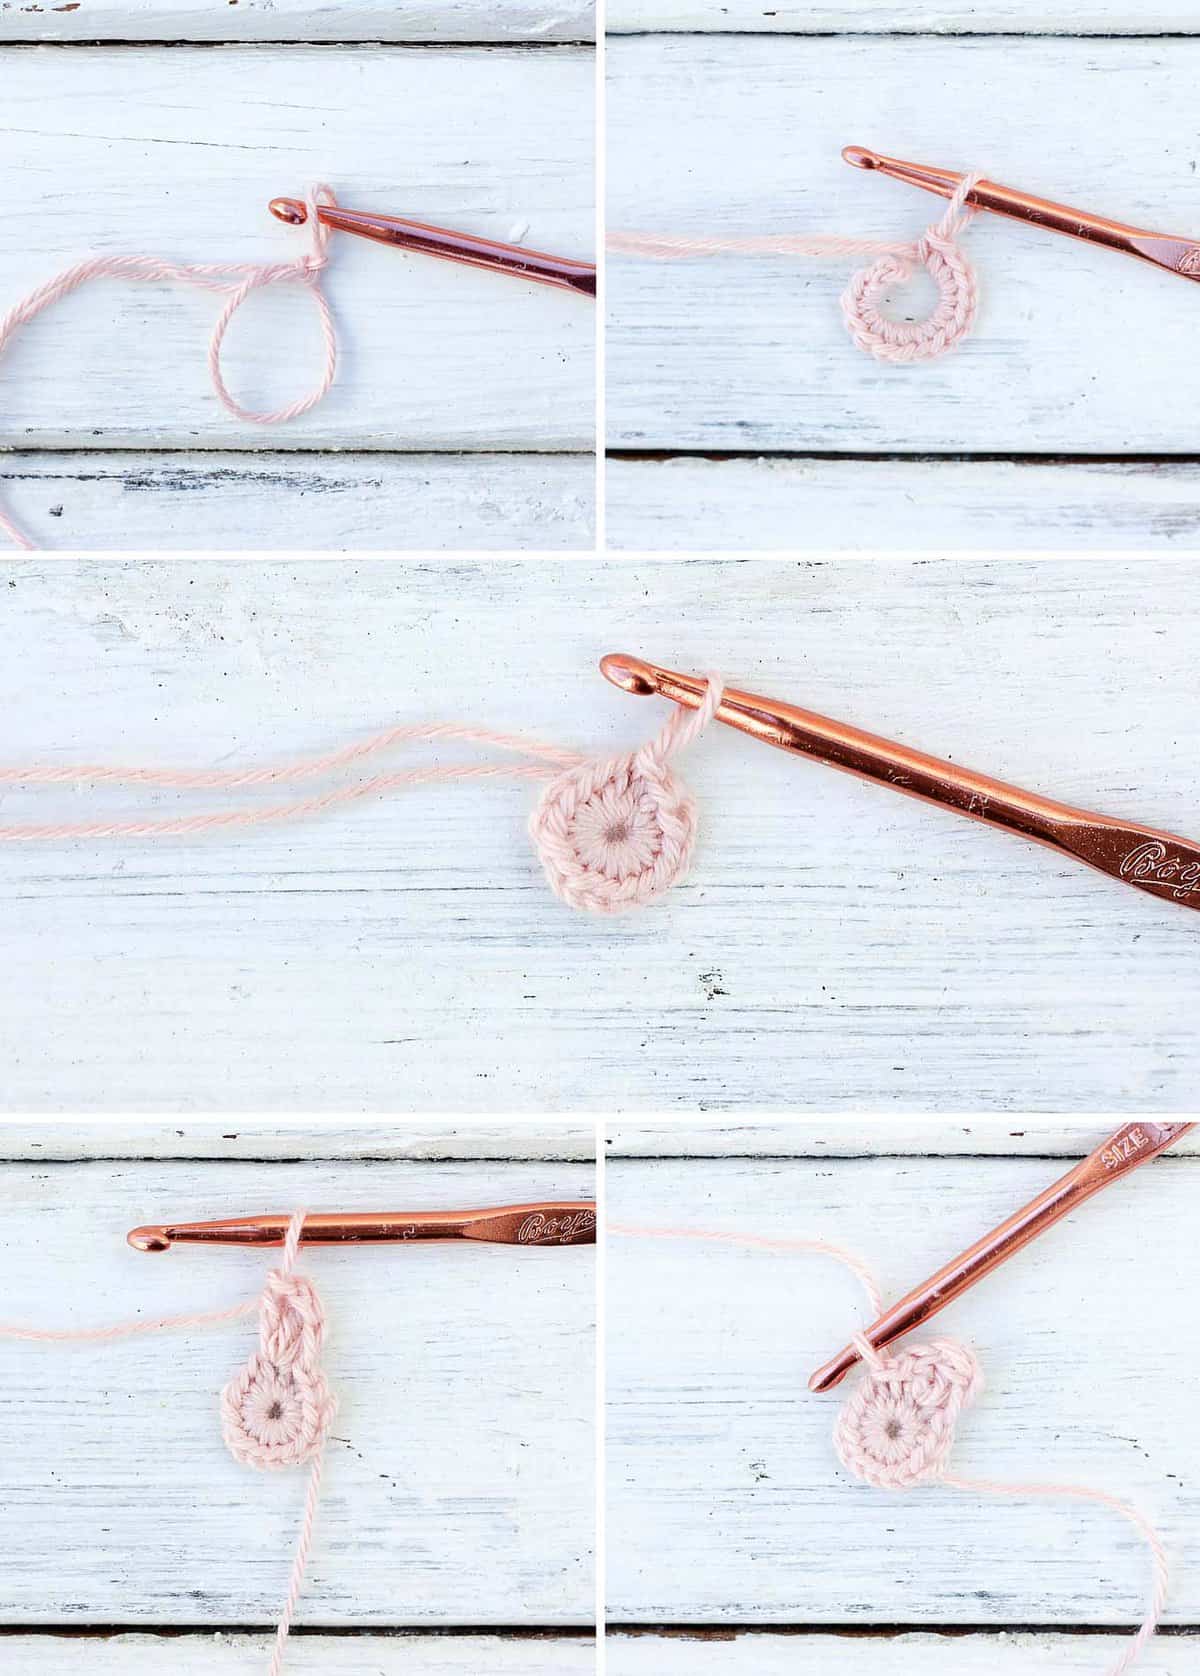 Step by step photo tutorial of how to begin a crochet a flower.